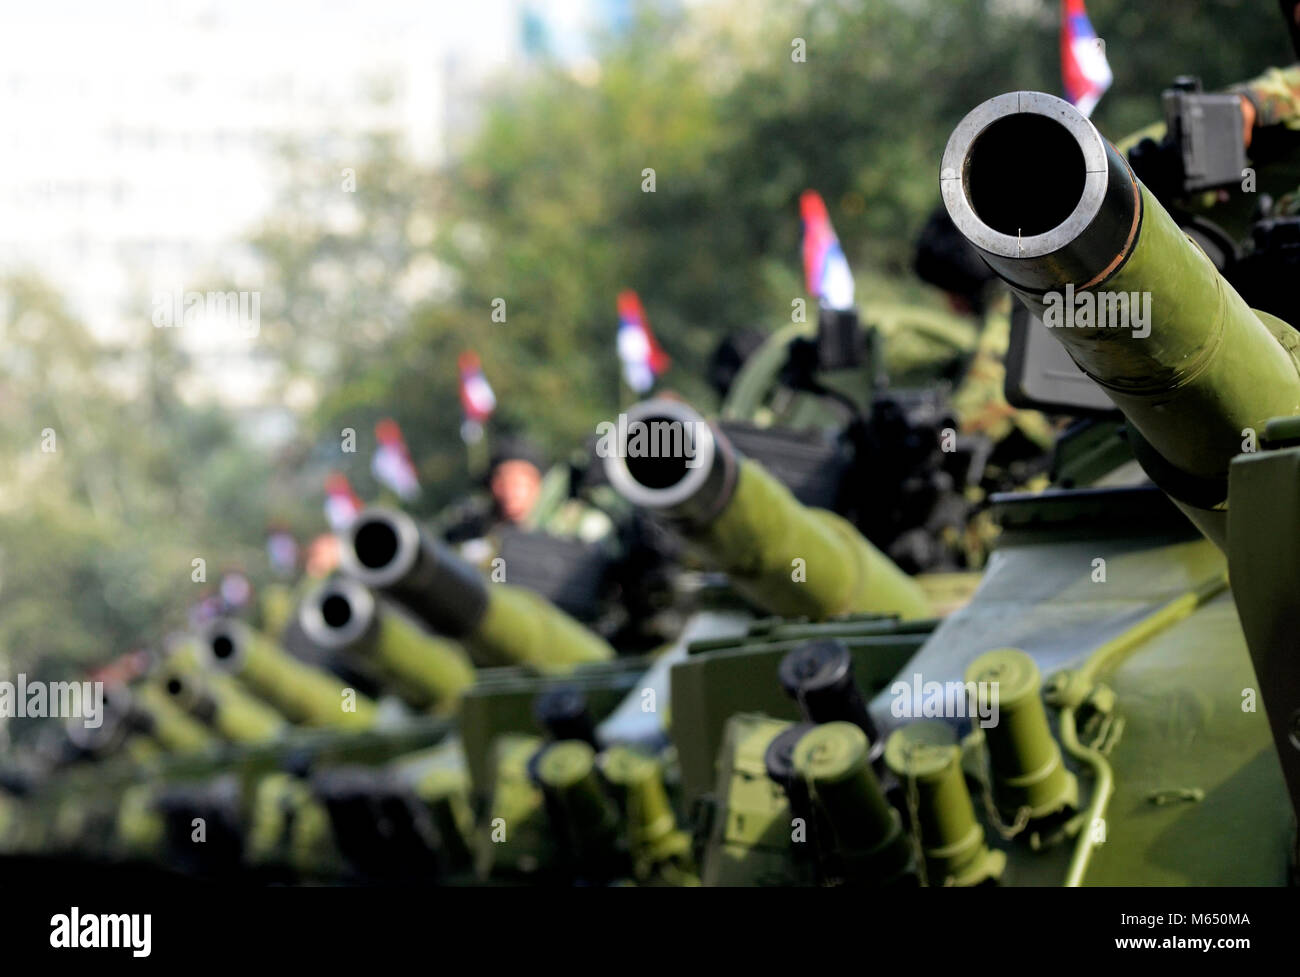 Serbian army main battle tanks in row during parade Stock Photo